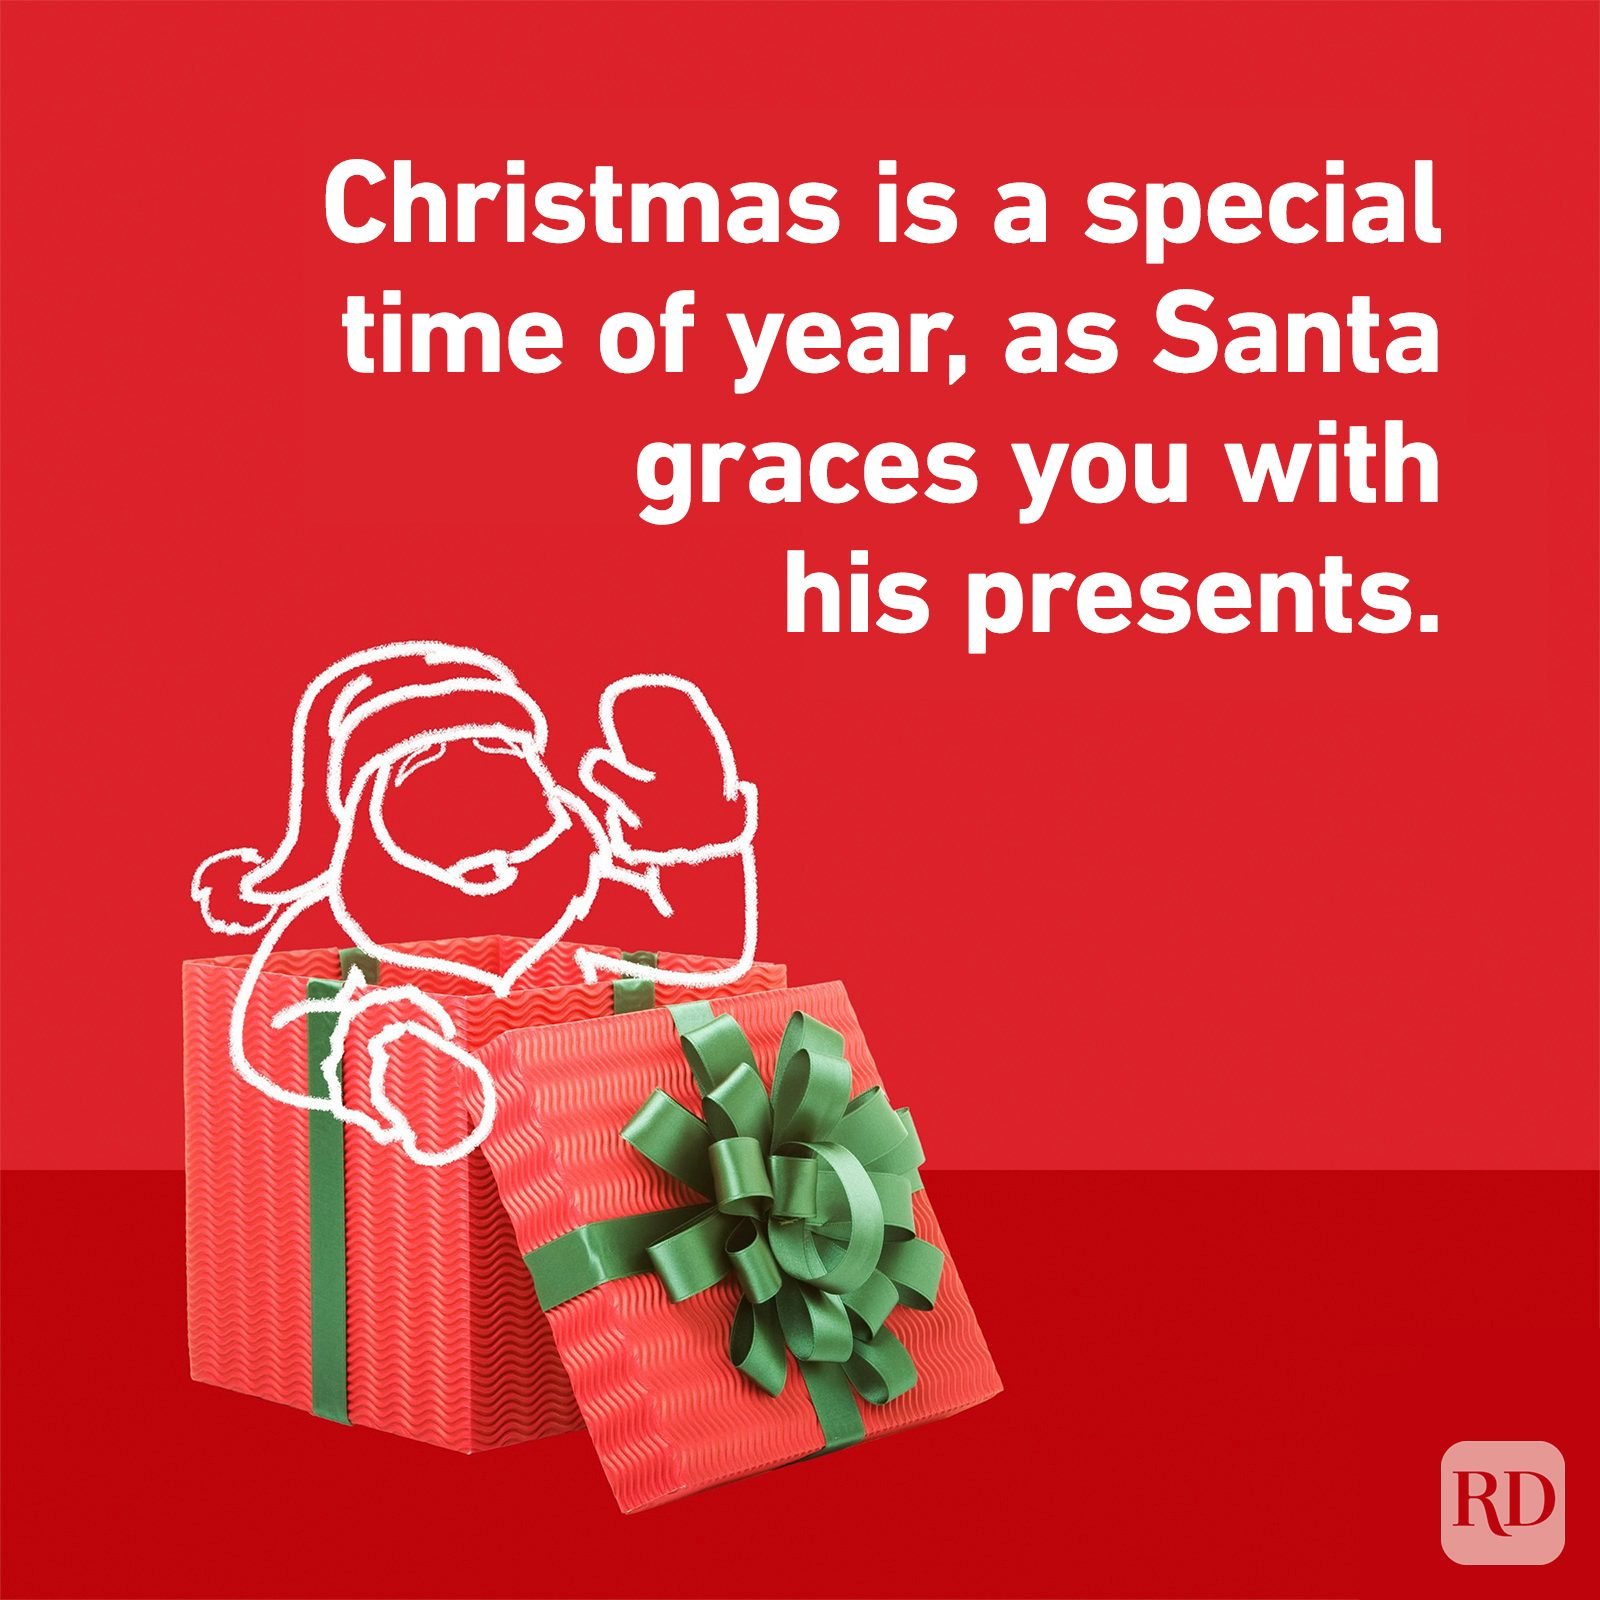 100 Funniest Christmas Puns for 2022 — Hilarious Holiday Puns